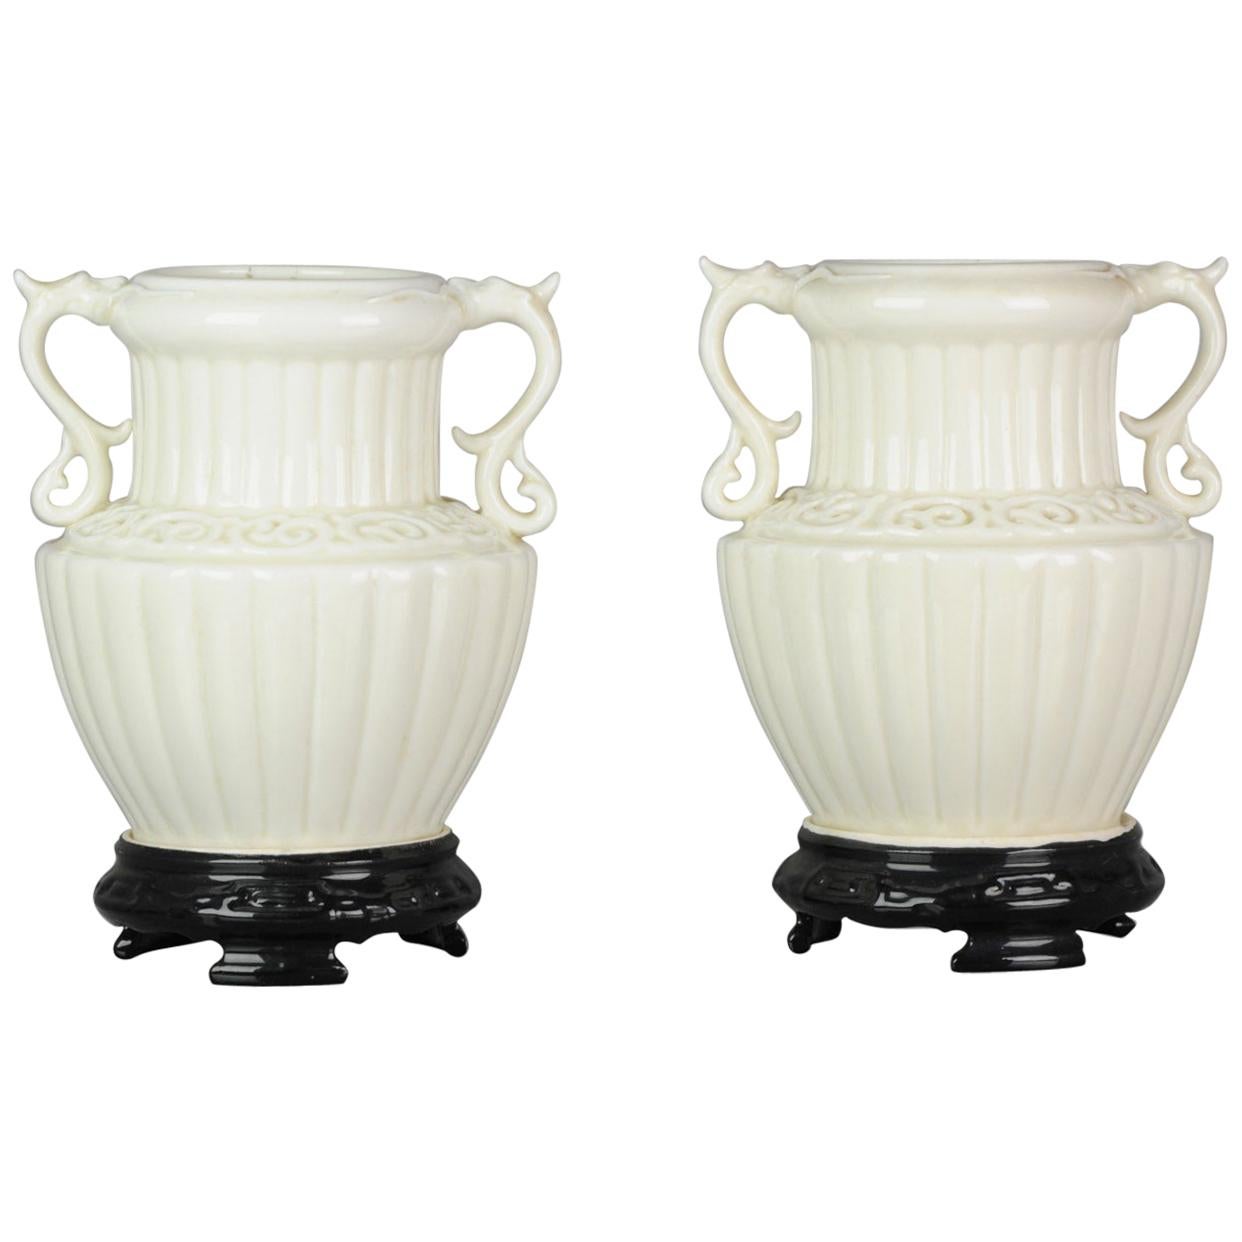 Pair of Chinese 1978 Dehua Monochrome White Porcelain Vases China PRoC For Sale